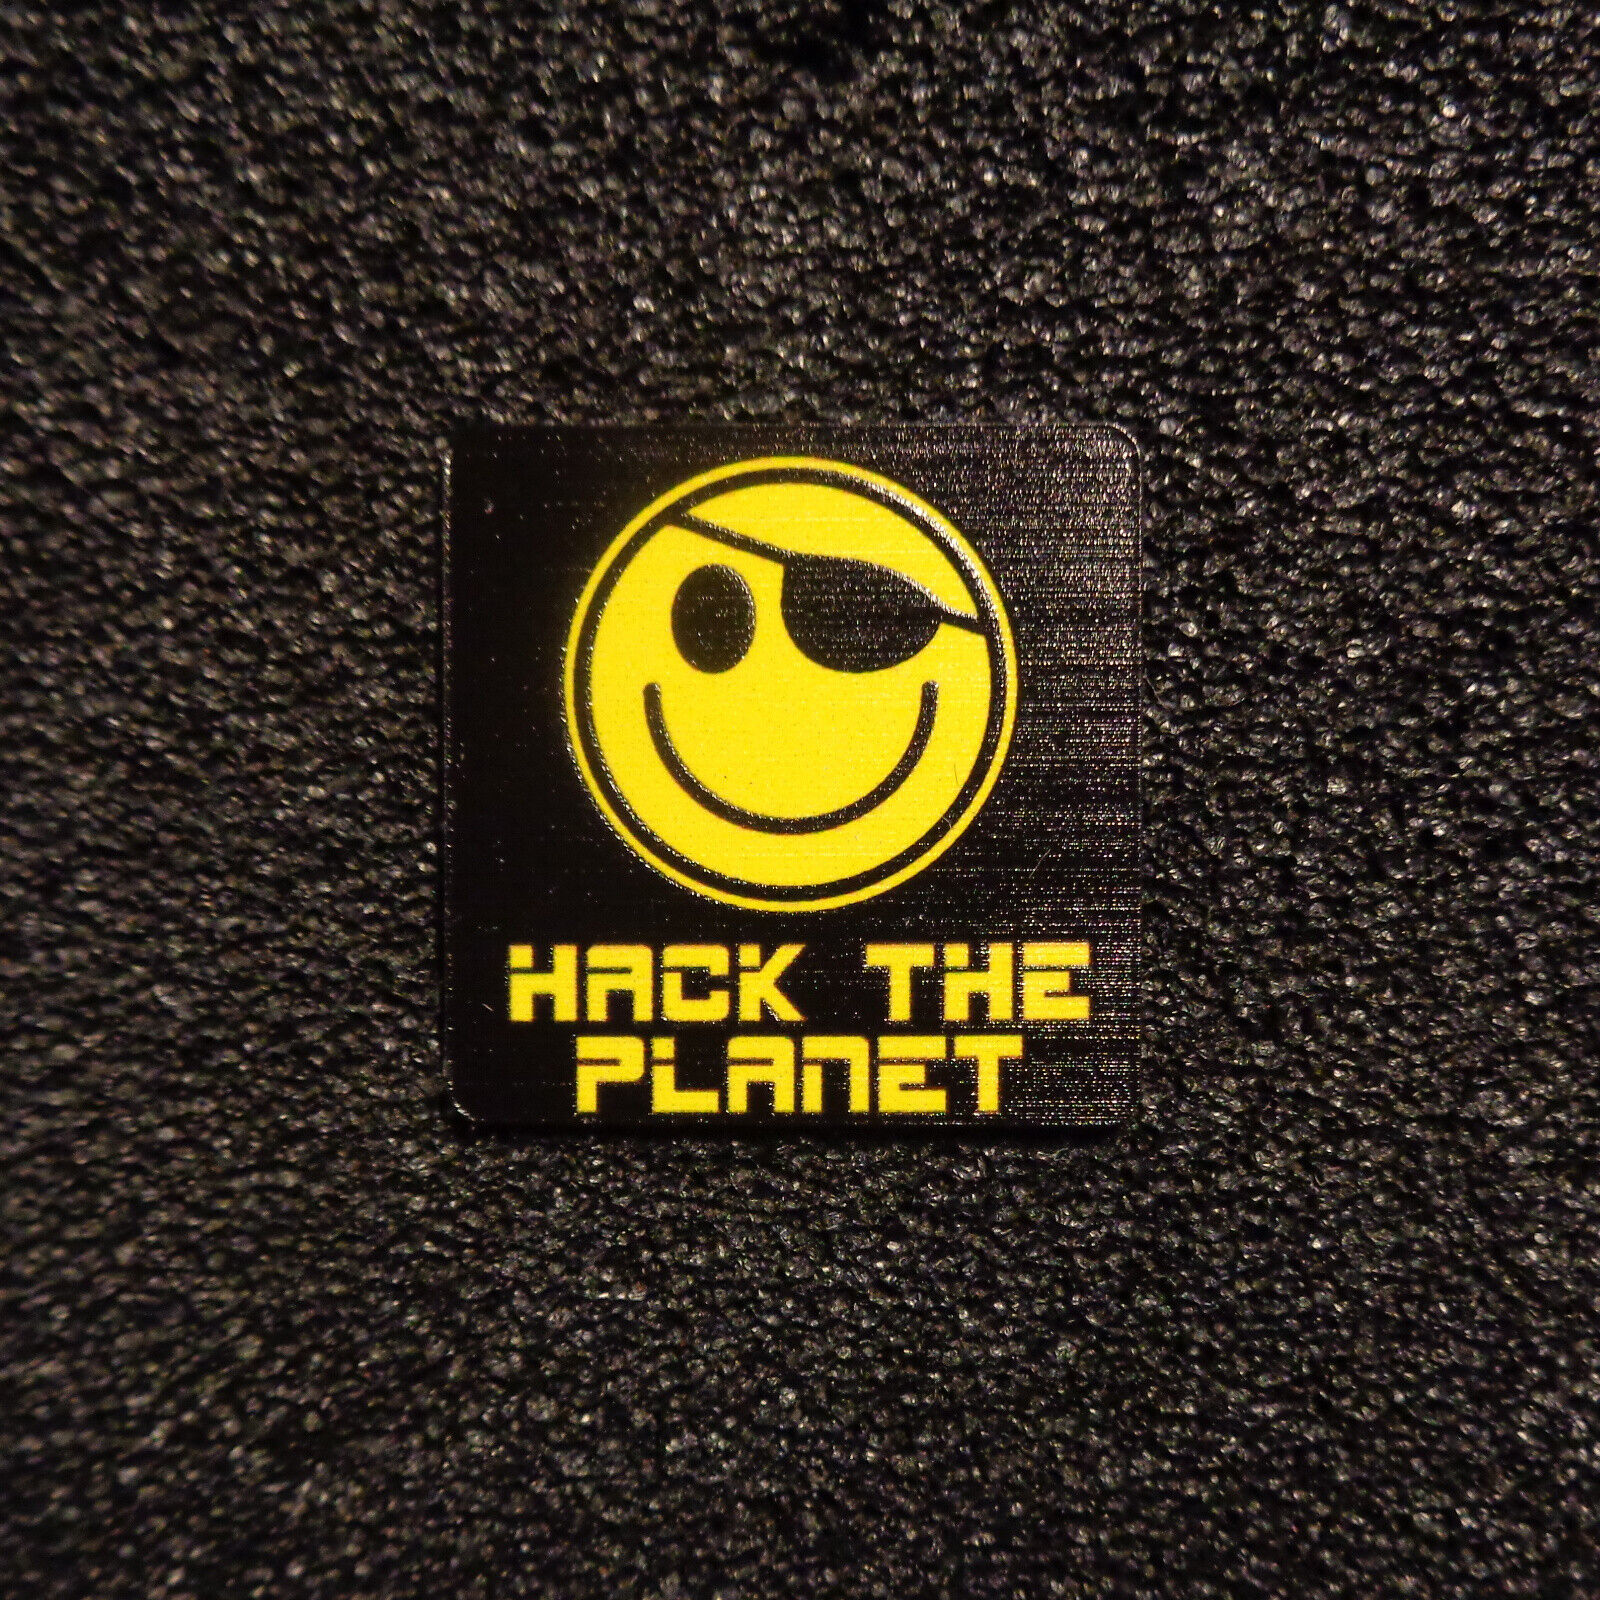 Hackers Hack the planet Logo Label Decal Case Sticker Badge [514b]